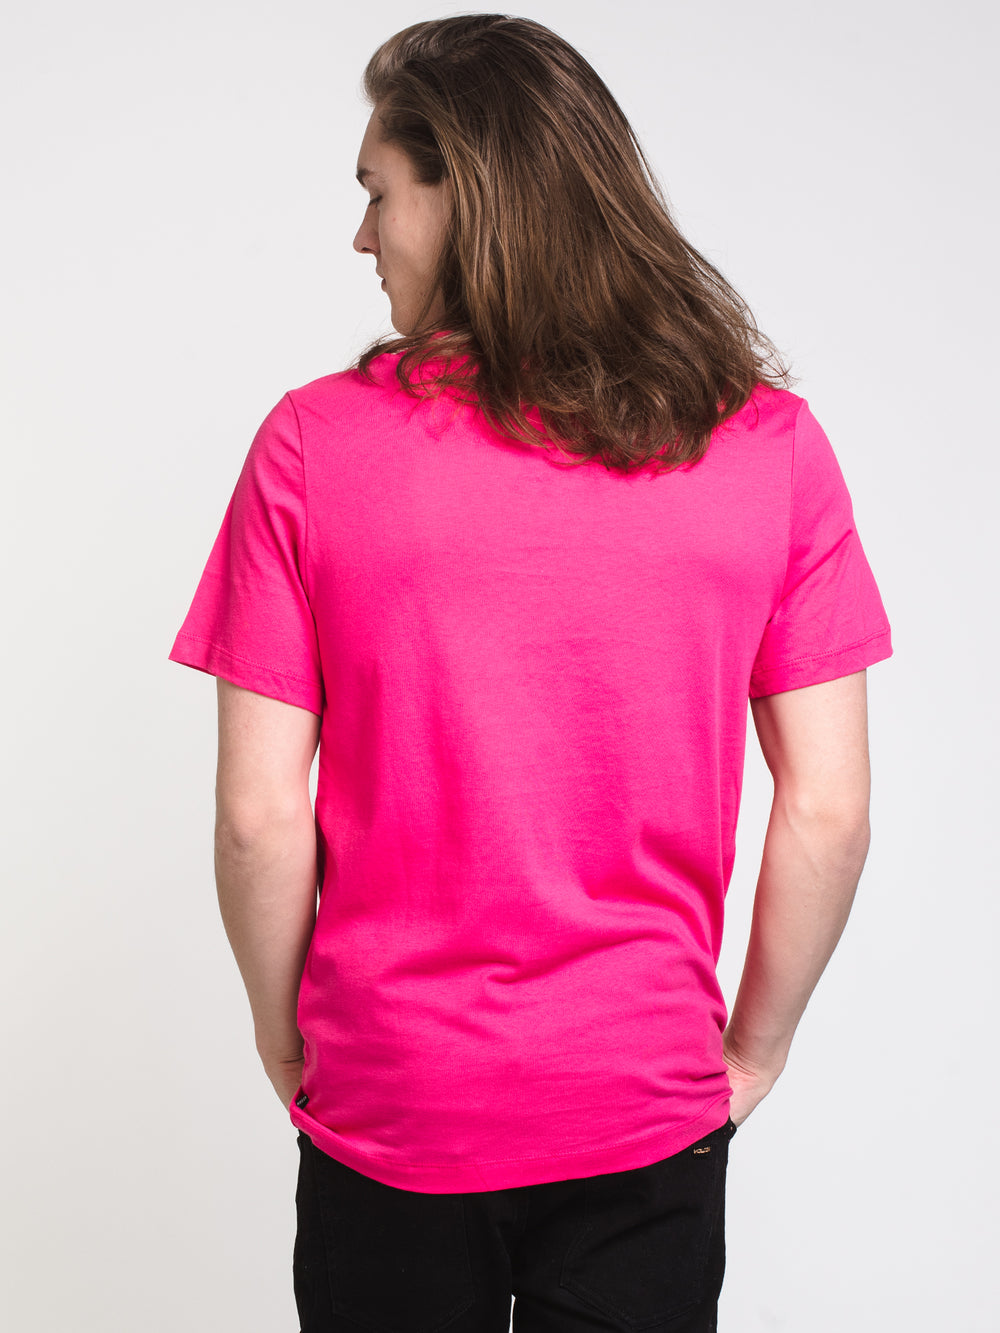 MENS SB EMBROIDERED SHORT SLEEVE LOGO T - WATERMELON - CLEARANCE